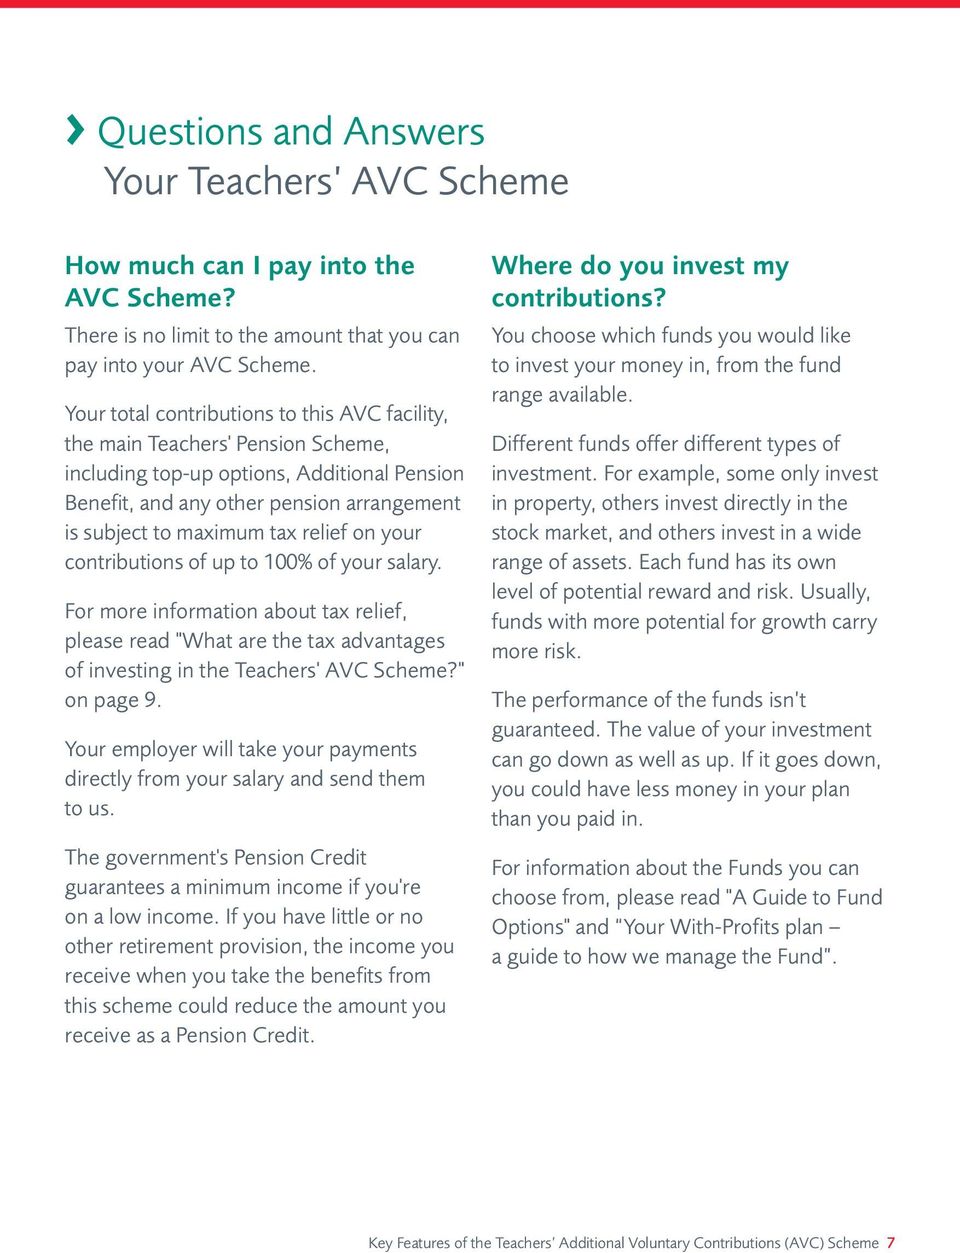 relief on your contributions of up to 100% of your salary. For more information about tax relief, please read "What are the tax advantages of investing in the Teachers' AVC Scheme?" on page 9.